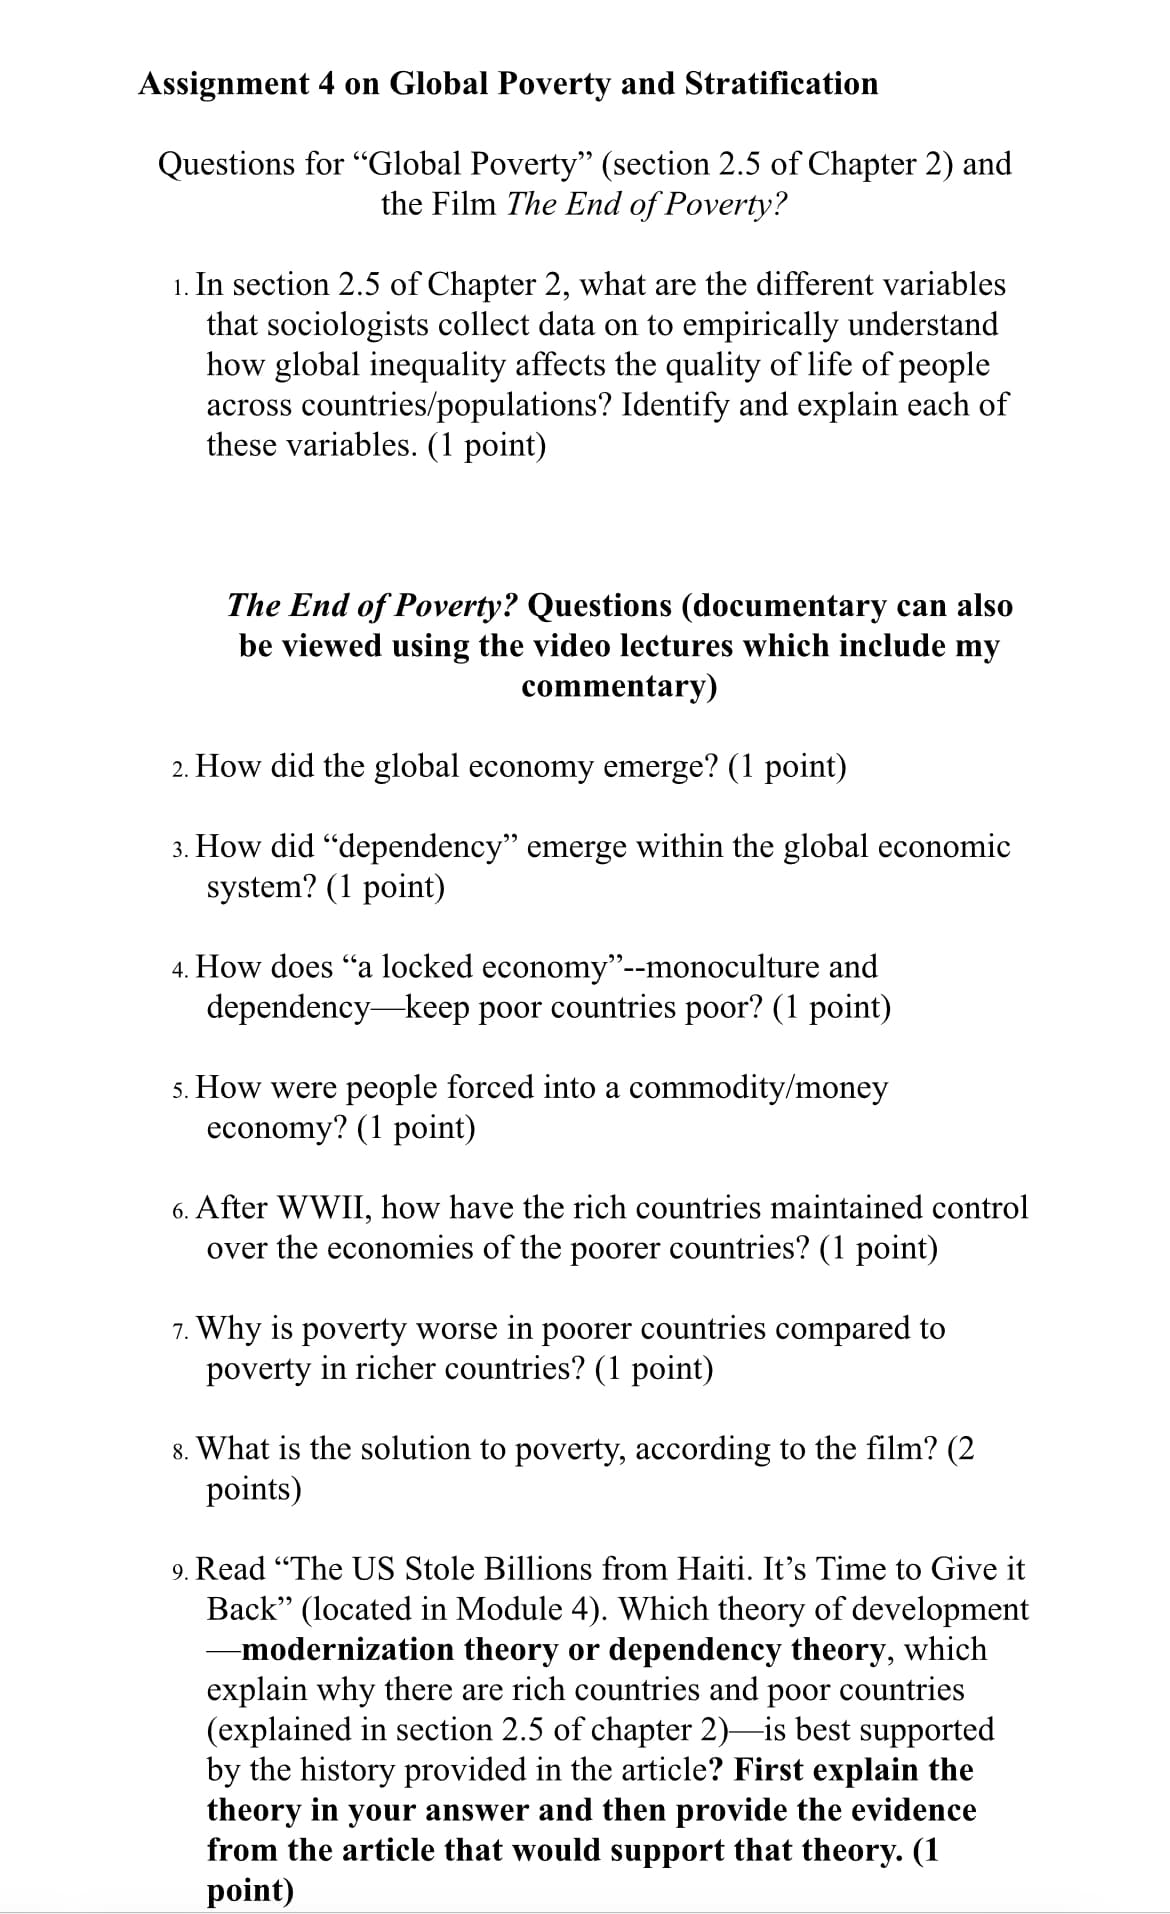 Assignment 4 on Global Poverty and Stratification
Questions for "Global Poverty” (section 2.5 of Chapter 2) and
the Film The End of Poverty?
1. In section 2.5 of Chapter 2, what are the different variables
that sociologists collect data on to empirically understand
how global inequality affects the quality of life of people
across countries/populations? Identify and explain each of
these variables. (1 point)
The End of Poverty? Questions (documentary can also
be viewed using the video lectures which include my
commentary)
2. How did the global economy emerge? (1 point)
3. How did "dependency" emerge within the global economic
system? (1 point)
4. How does "a locked economy"--monoculture and
dependency keep poor countries poor? (1 point)
5. How were people forced into a commodity/money
economy? (1 point)
6. After WWII, how have the rich countries maintained control
over the economies of the poorer countries? (1 point)
7. Why is poverty worse in poorer countries compared to
poverty in richer countries? (1 point)
8. What is the solution to poverty, according to the film? (2
points)
9. Read "The US Stole Billions from Haiti. It's Time to Give it
Back" (located in Module 4). Which theory of development
-modernization theory or dependency theory, which
explain why there are rich countries and poor countries
(explained in section 2.5 of chapter 2)—is best supported
by the history provided in the article? First explain the
theory in your answer and then provide the evidence
from the article that would support that theory. (1
point)